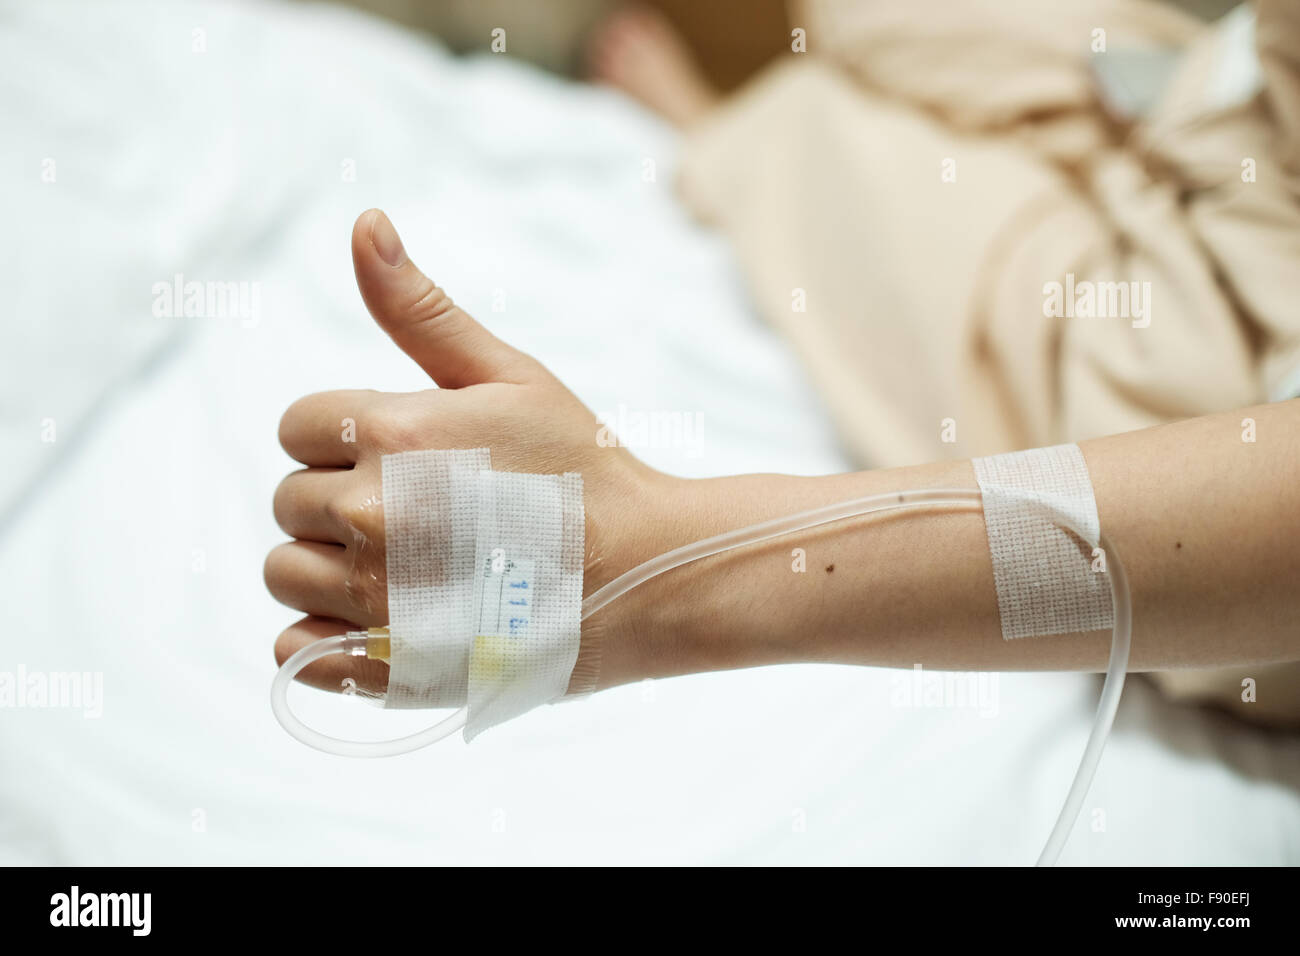 Patient hand thumbs up while given saline IV drip injection on hospital bed, medical or health concept Stock Photo